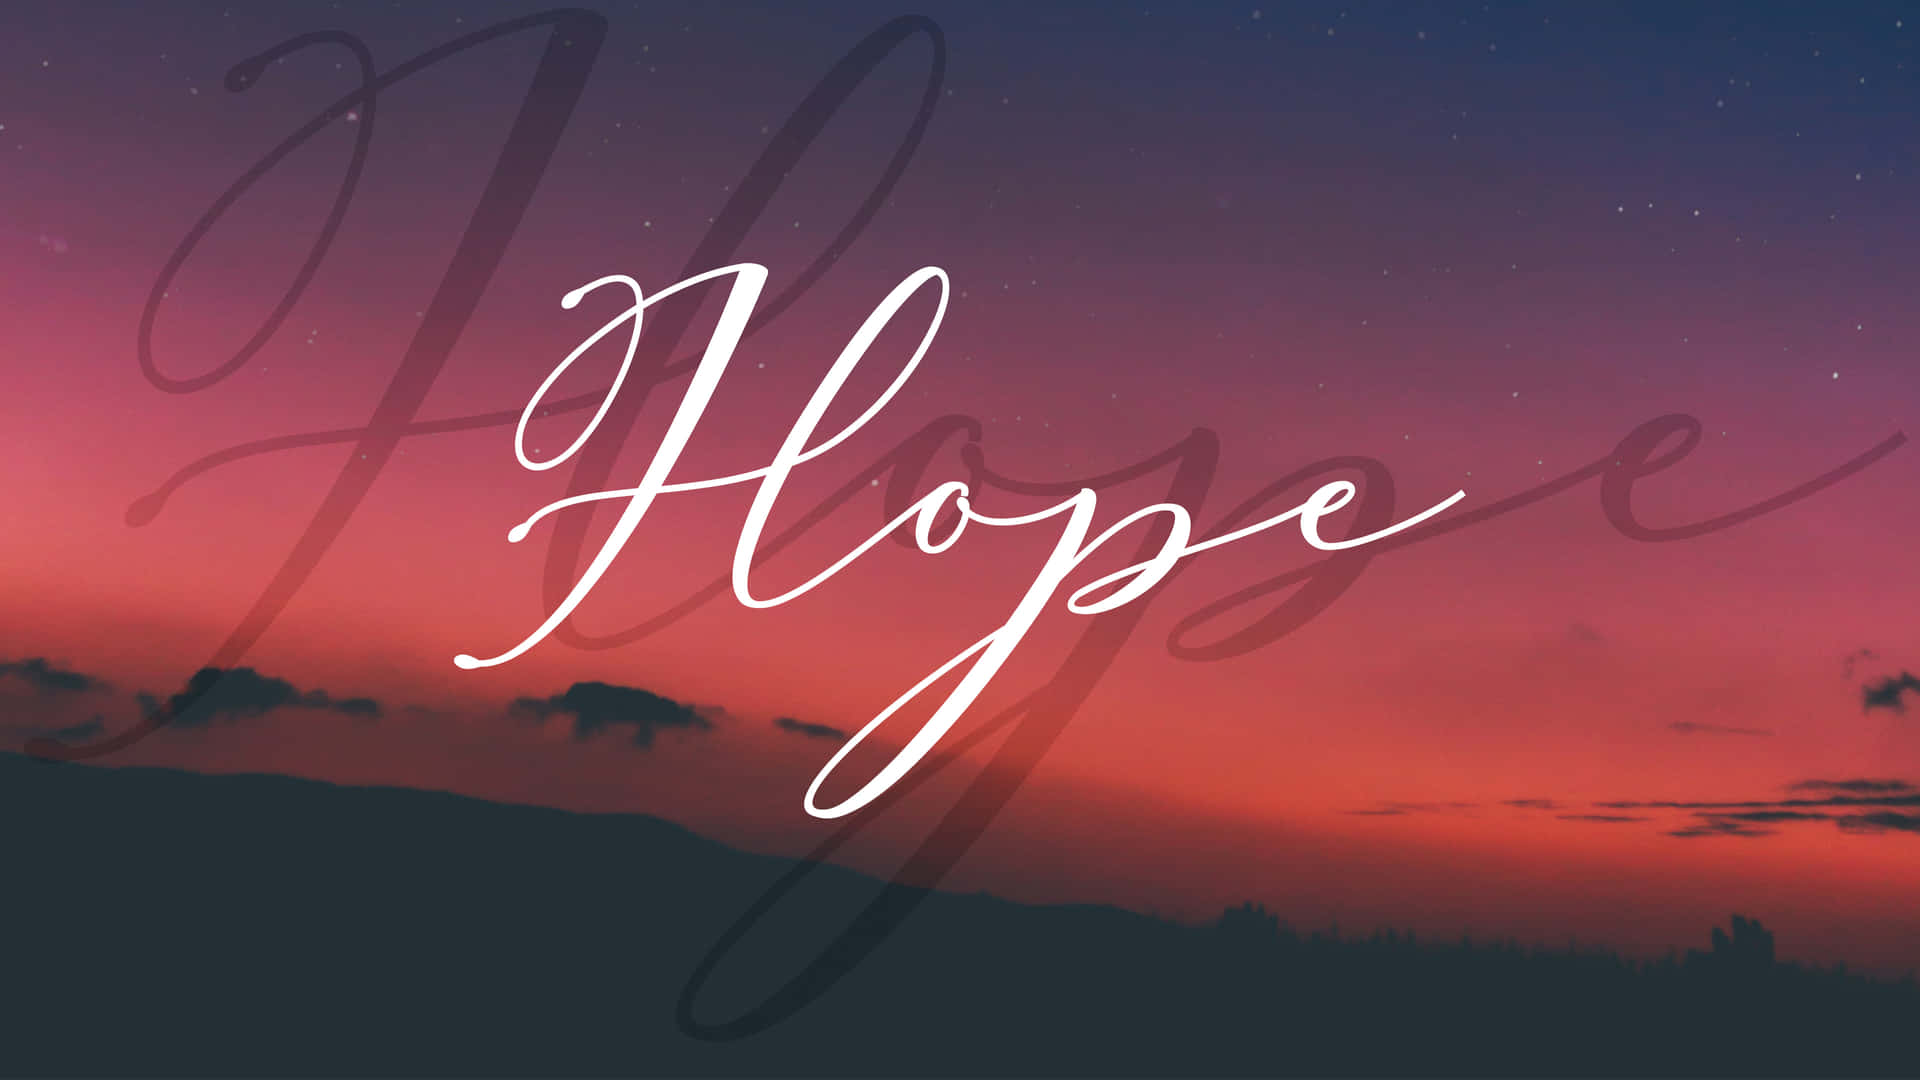 Free Hope Wallpaper Downloads, [100+] Hope Wallpapers for FREE | Wallpapers .com